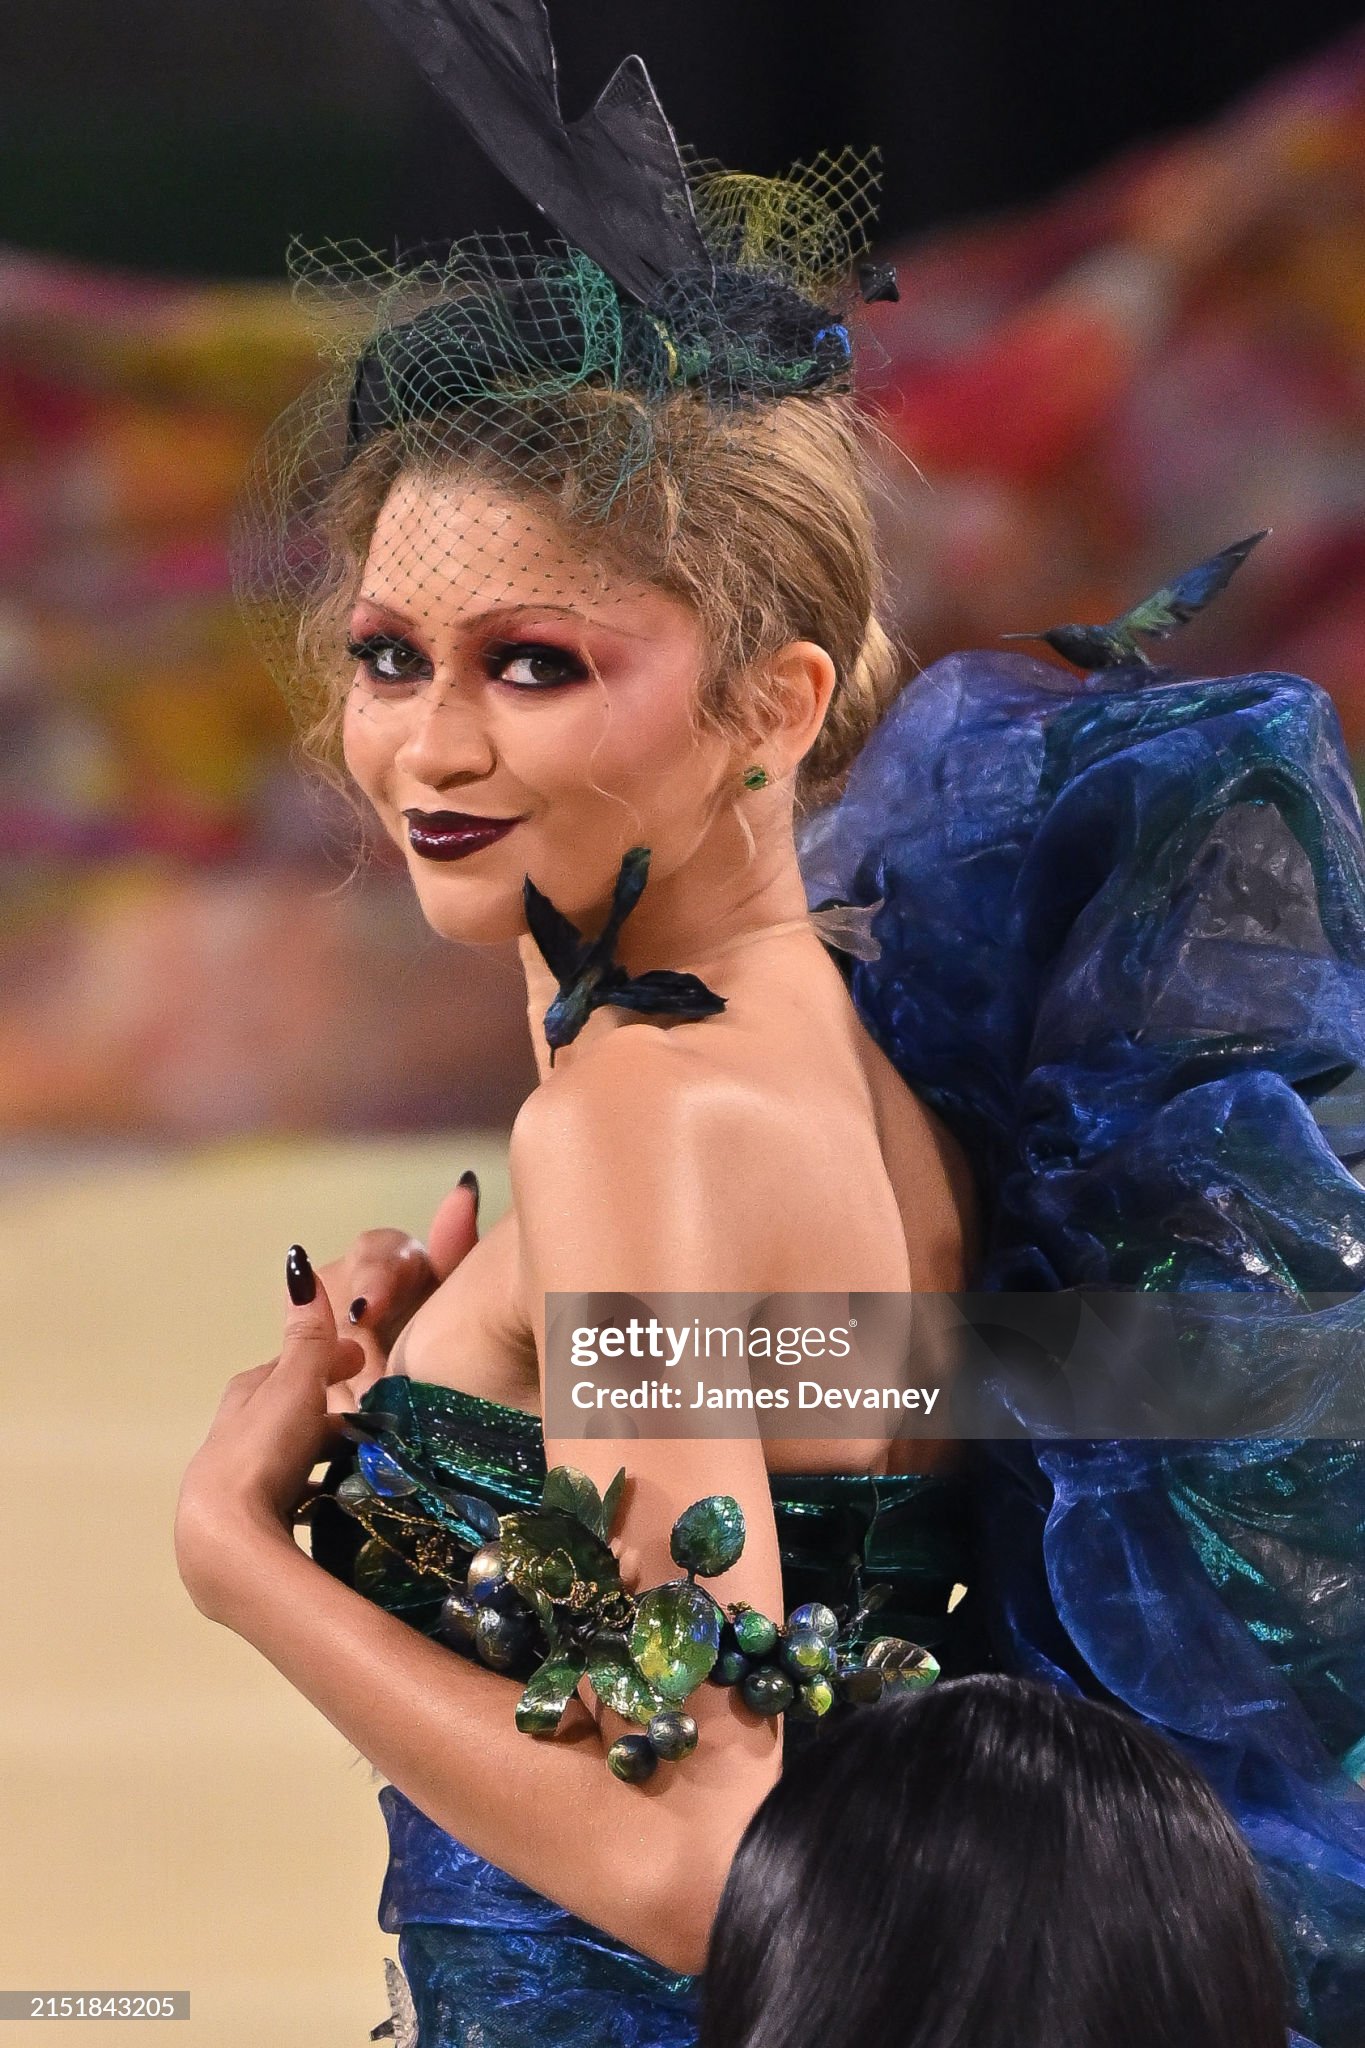 gettyimages-2151843205-2048x2048.jpg